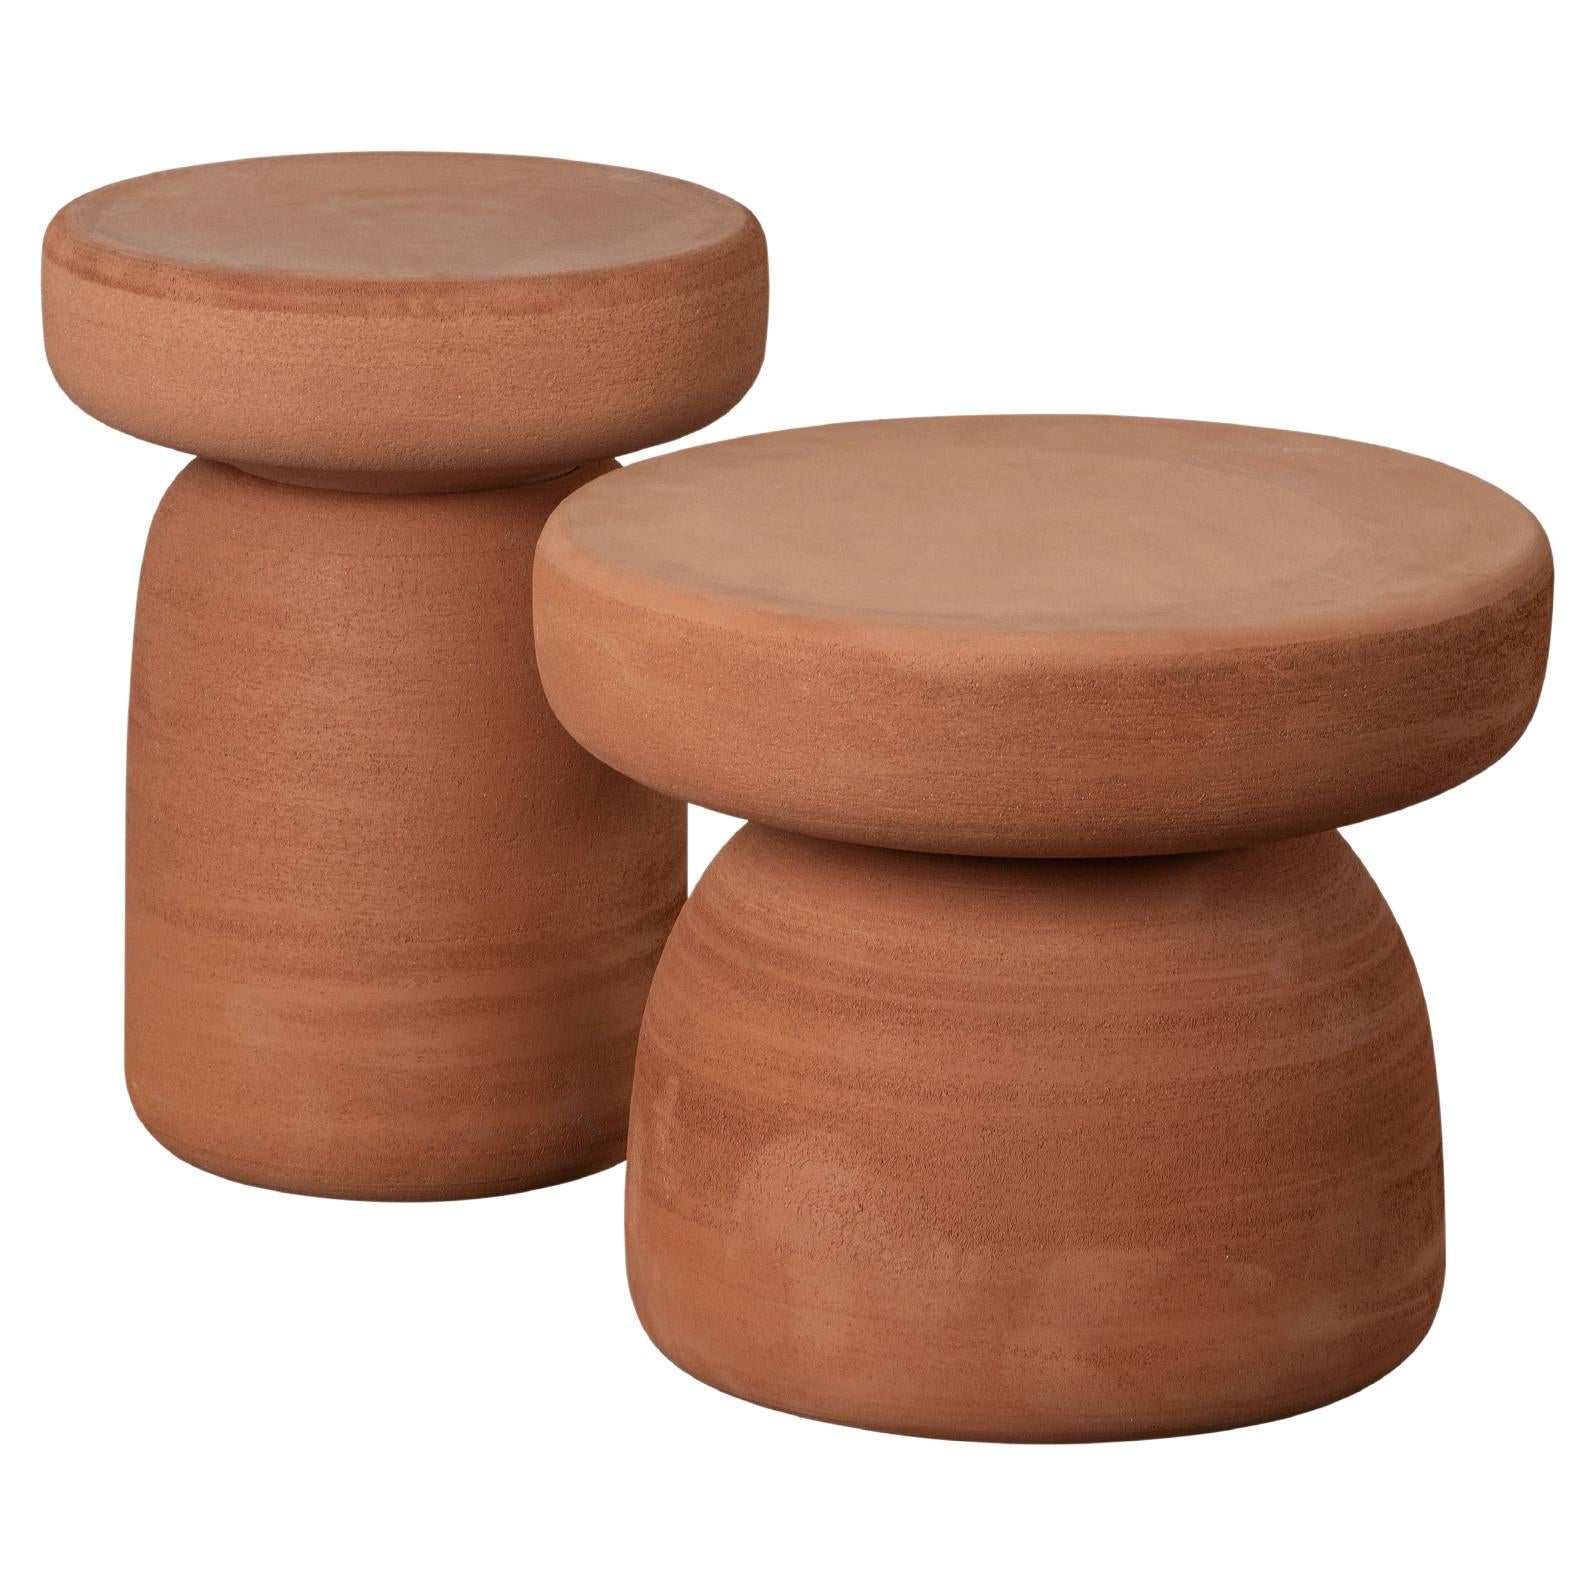 Tototo' Coffee Table in Hard Rock Terracotta by Paolo Cappello and Simone Sabati For Sale